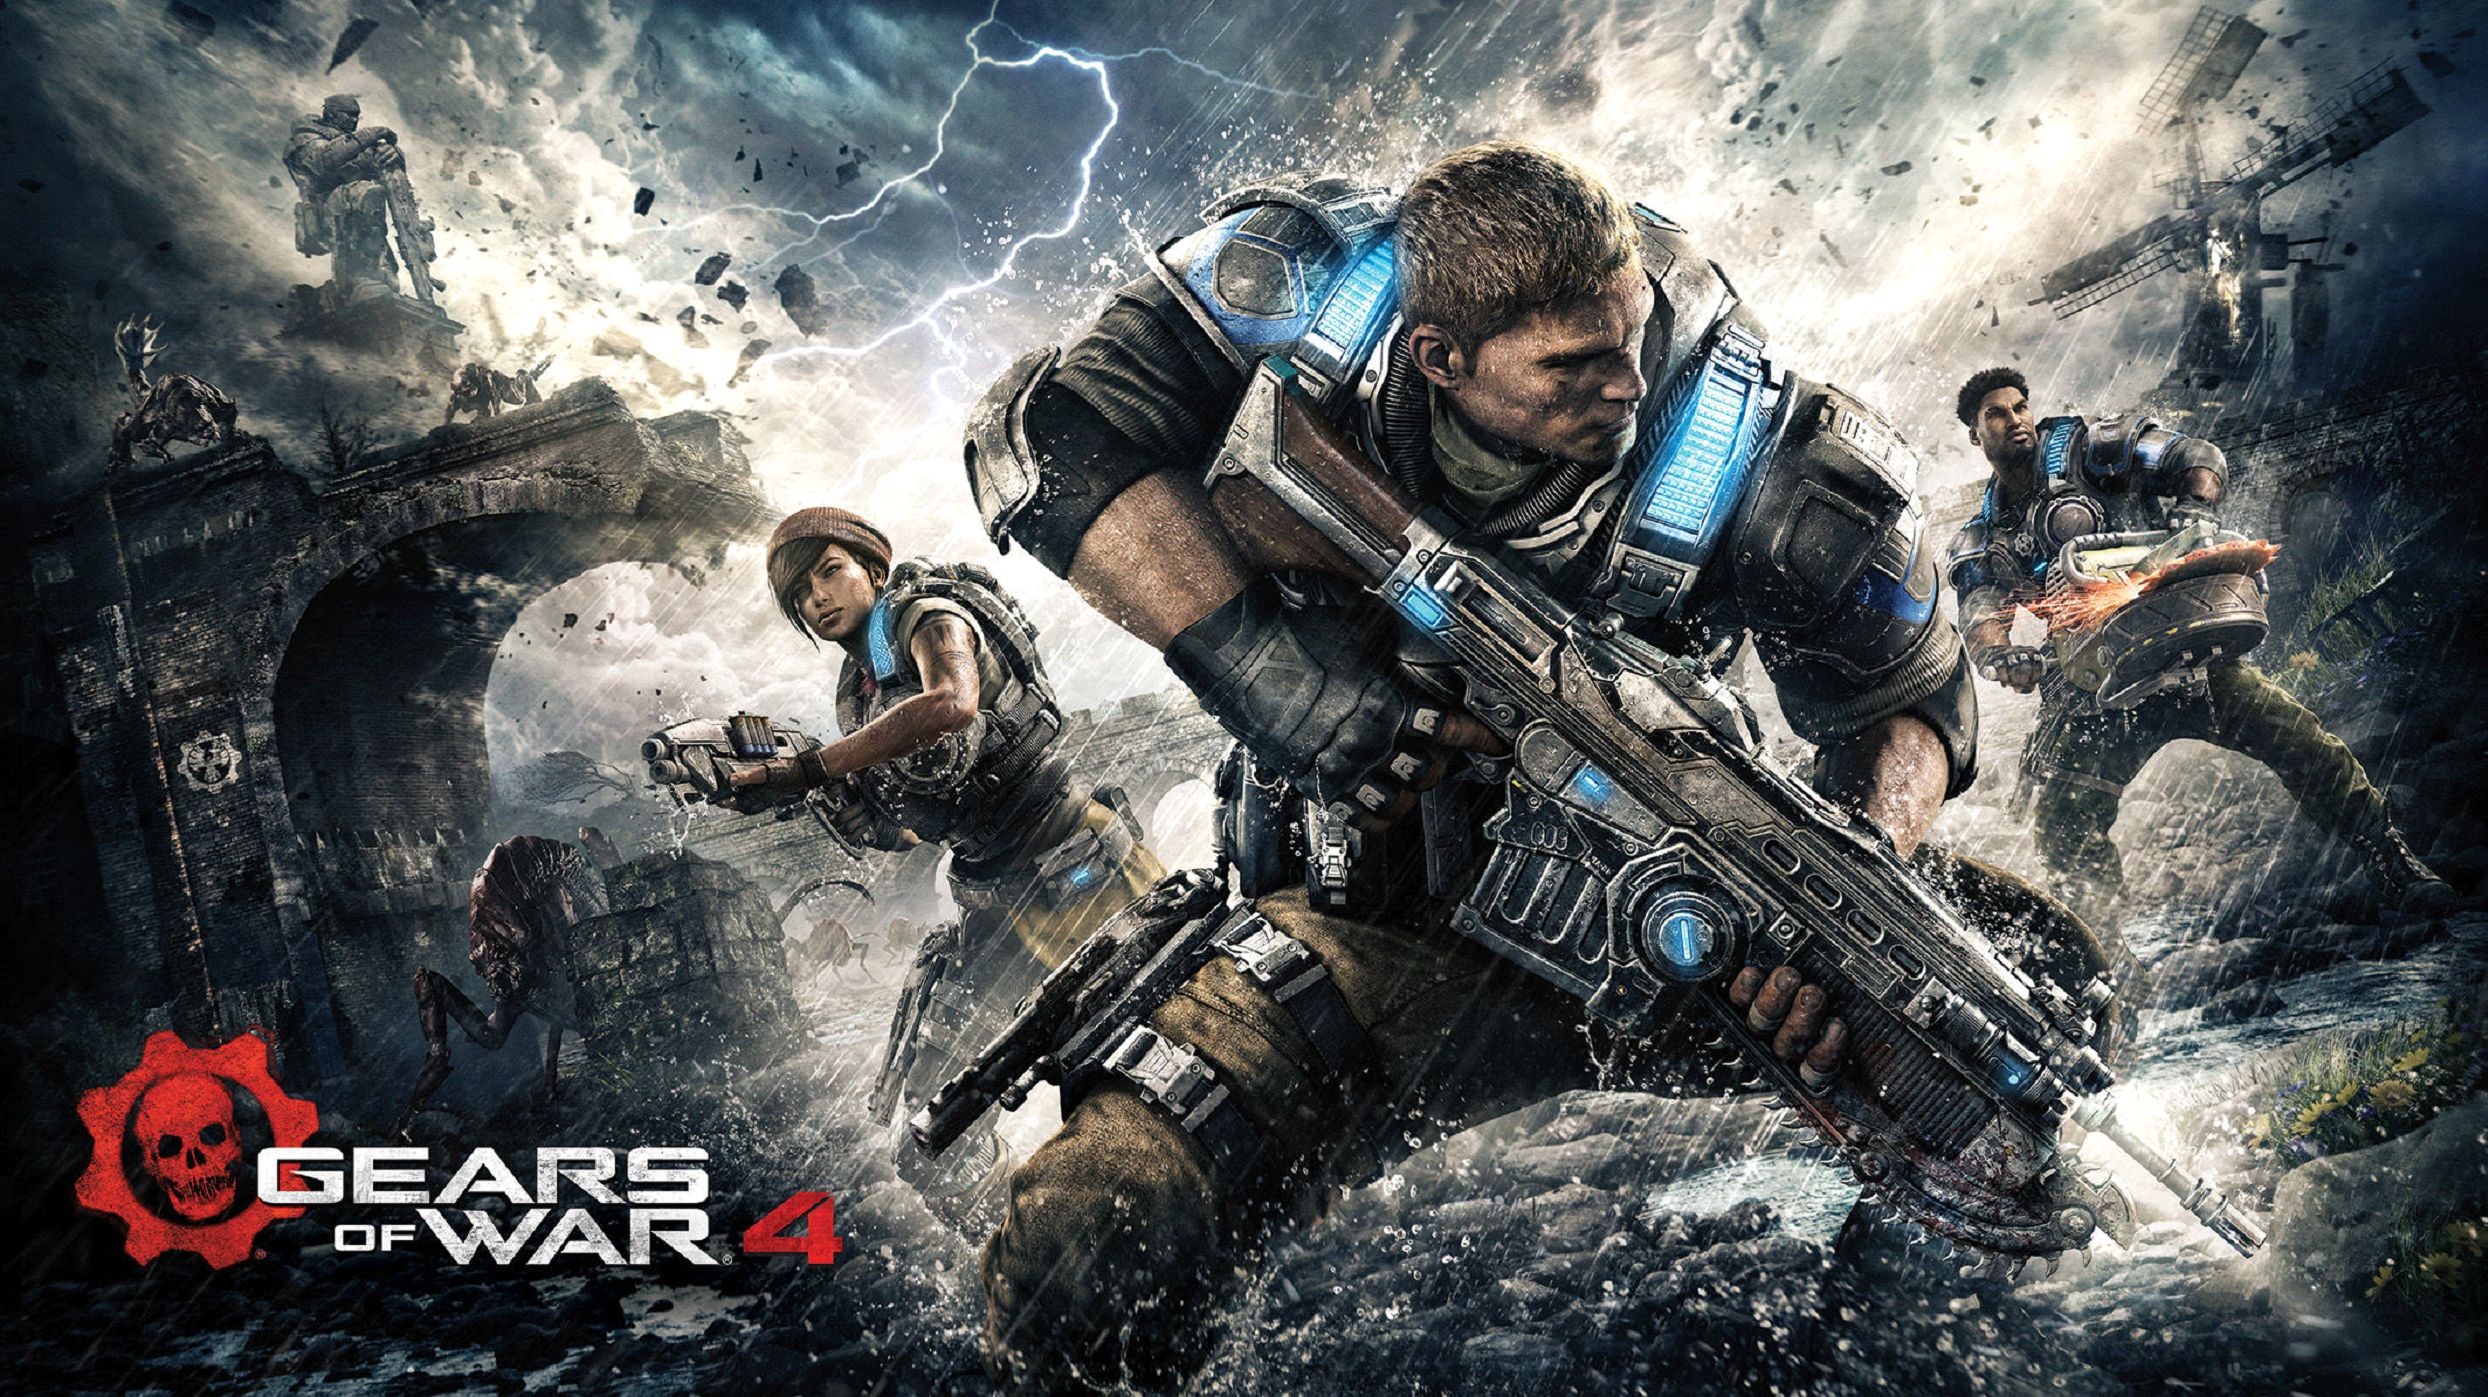 Command your elite squad and destroy aliens with the all-new Gears of War 4